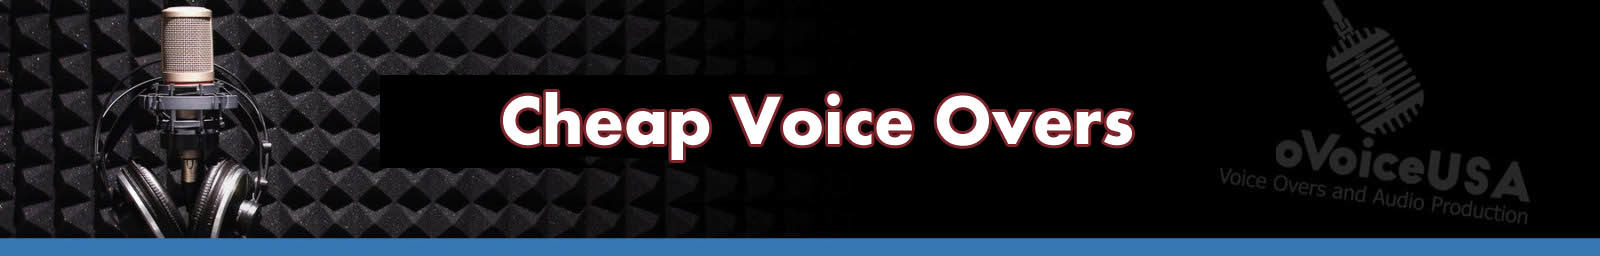 Cheap Voice Overs header